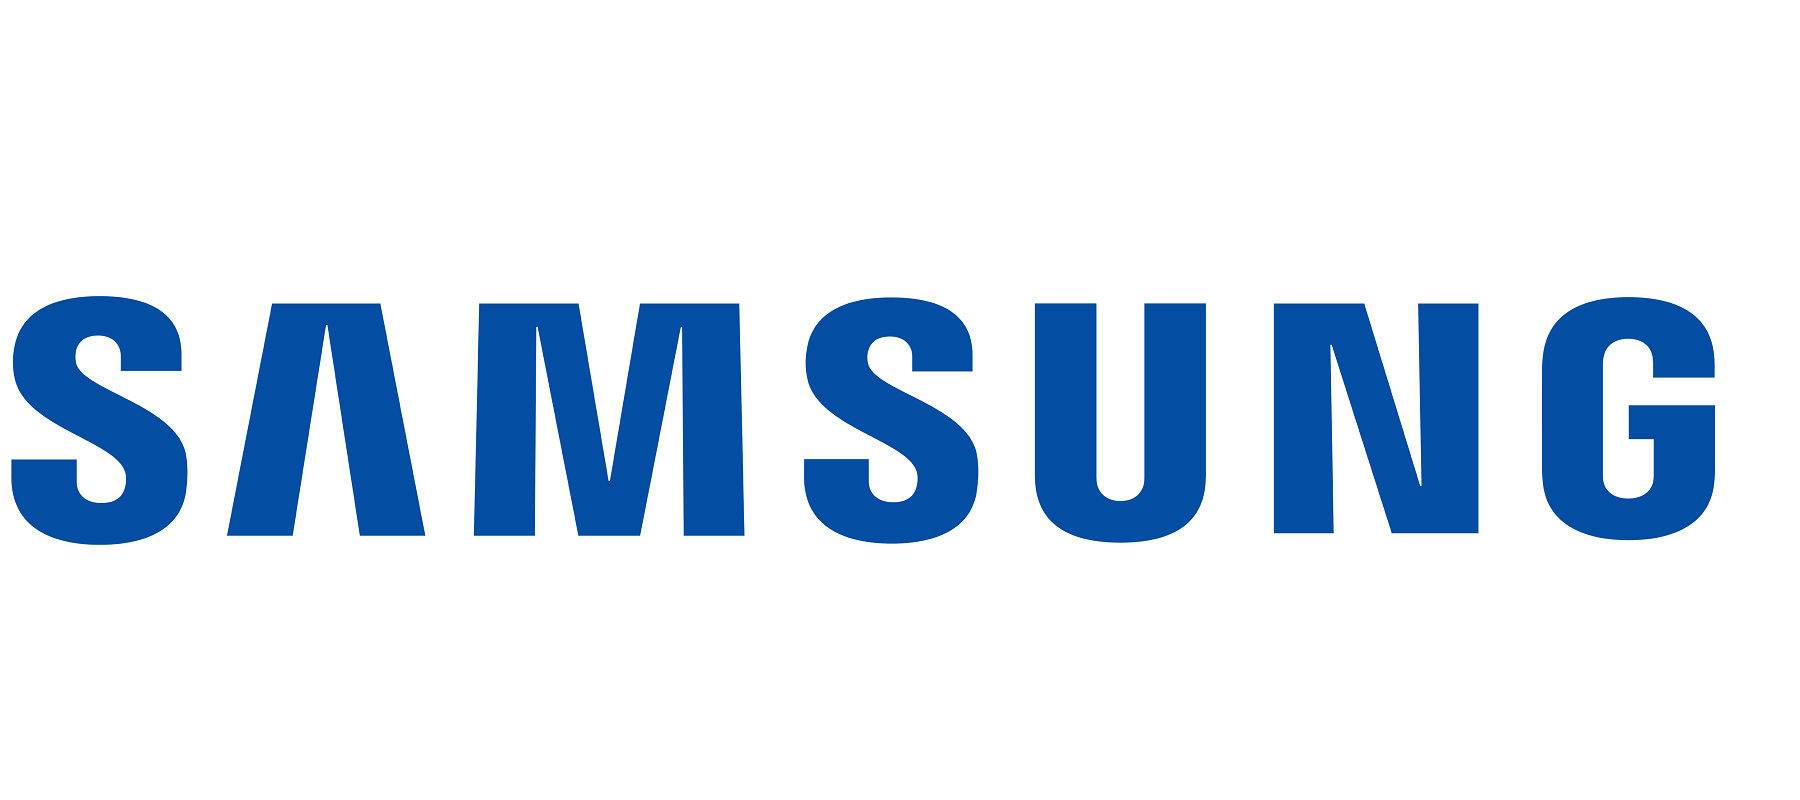 Samsung announces global launch of Samsung food, an AI-powered, personalized food and recipe service